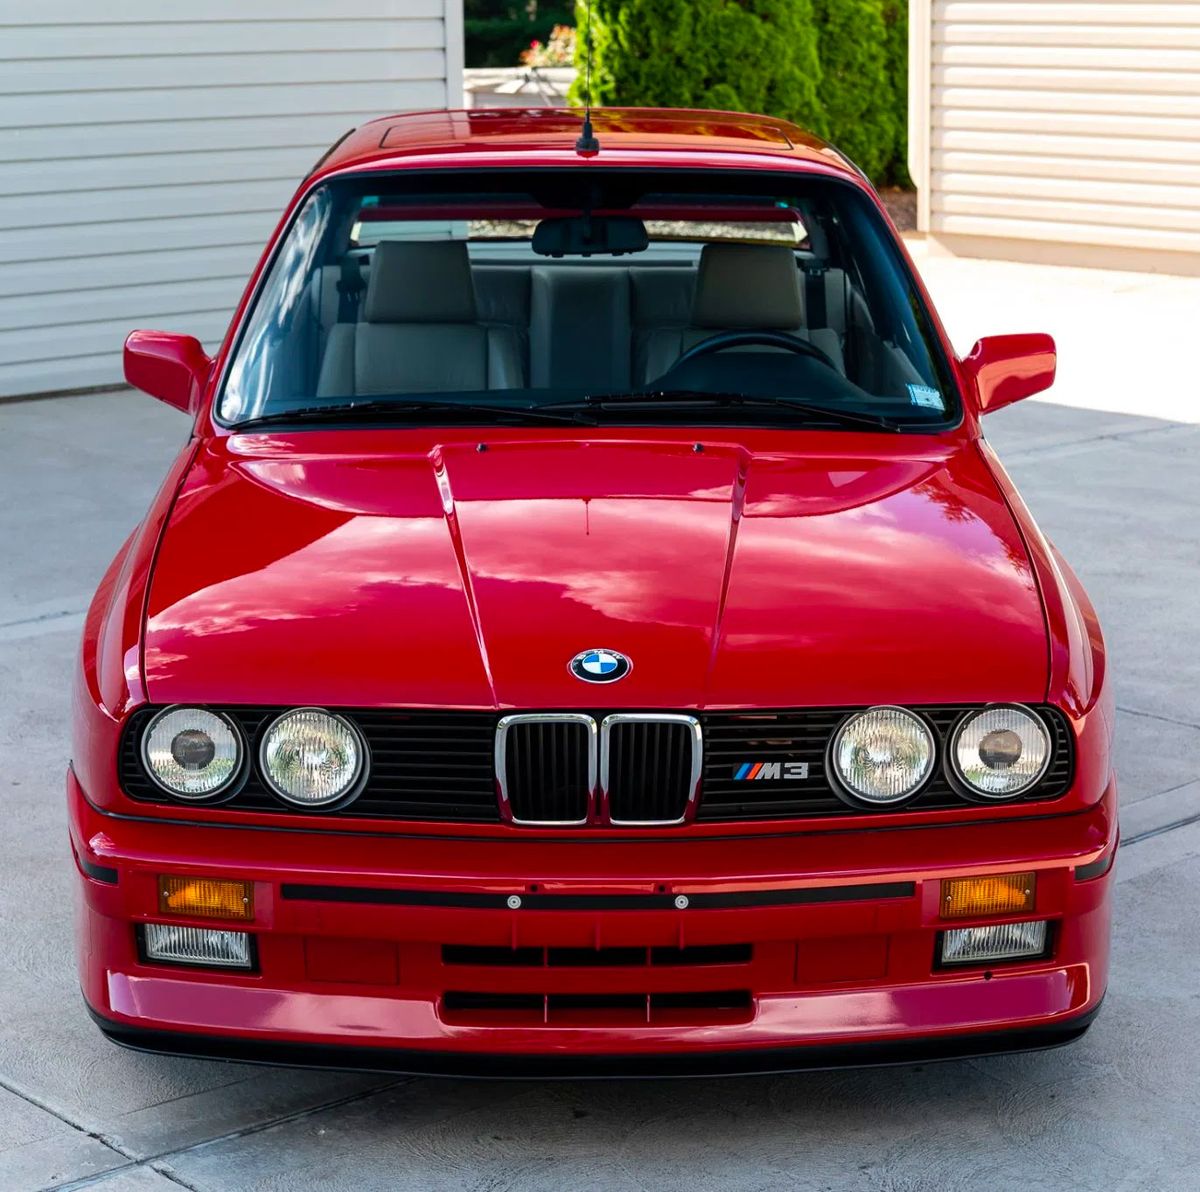 This E30 Bmw M3 Sold For A Mind-Blowingly Absurd Price